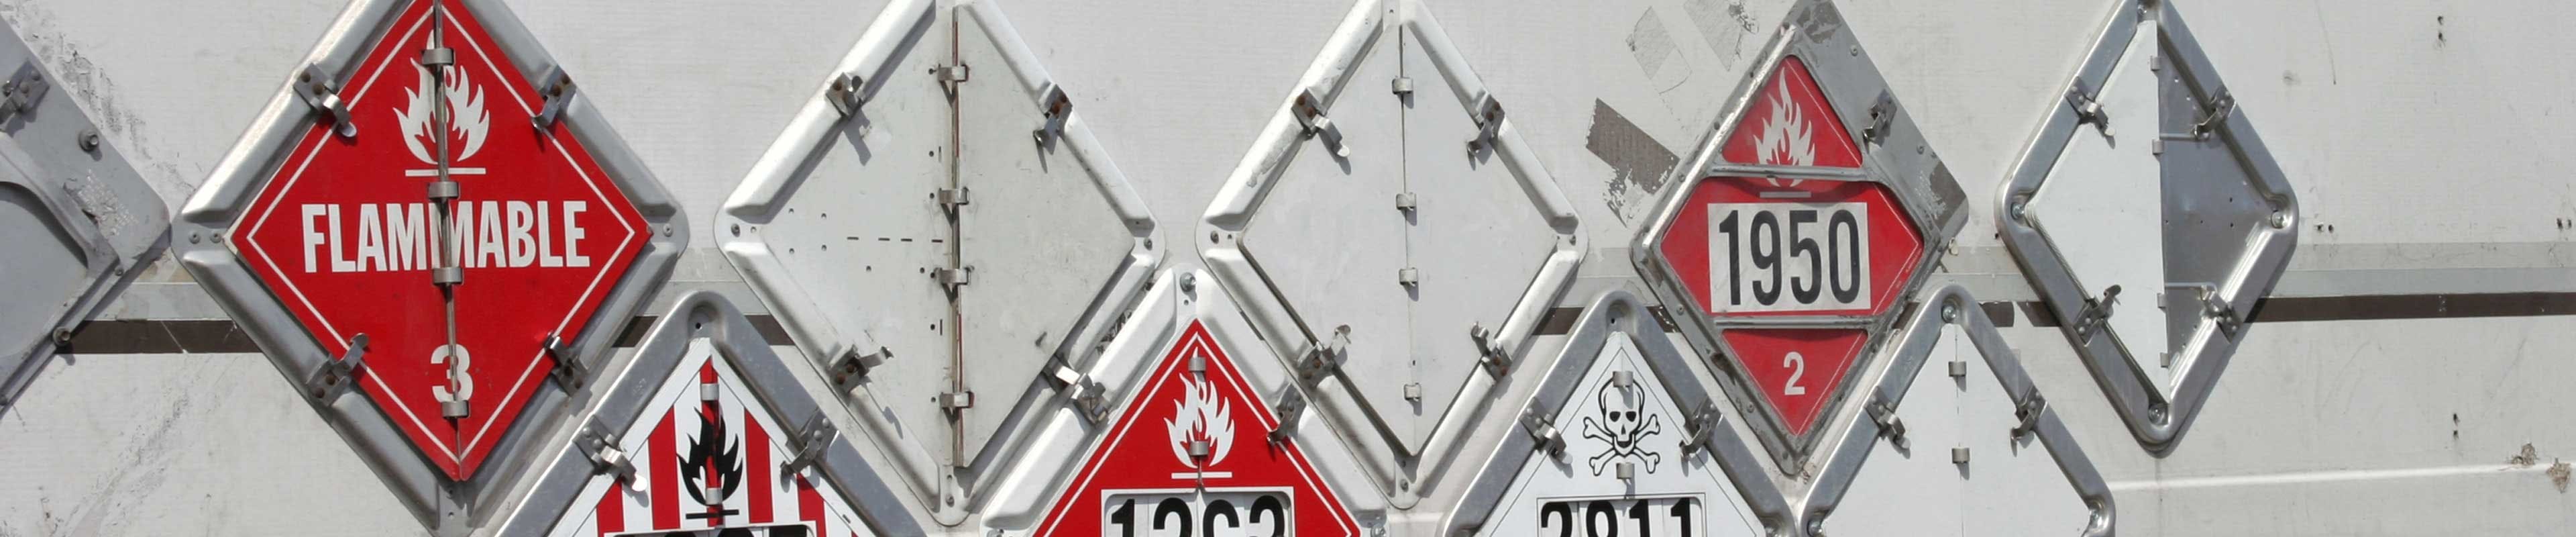 Hazardous material signs on a commercial truck